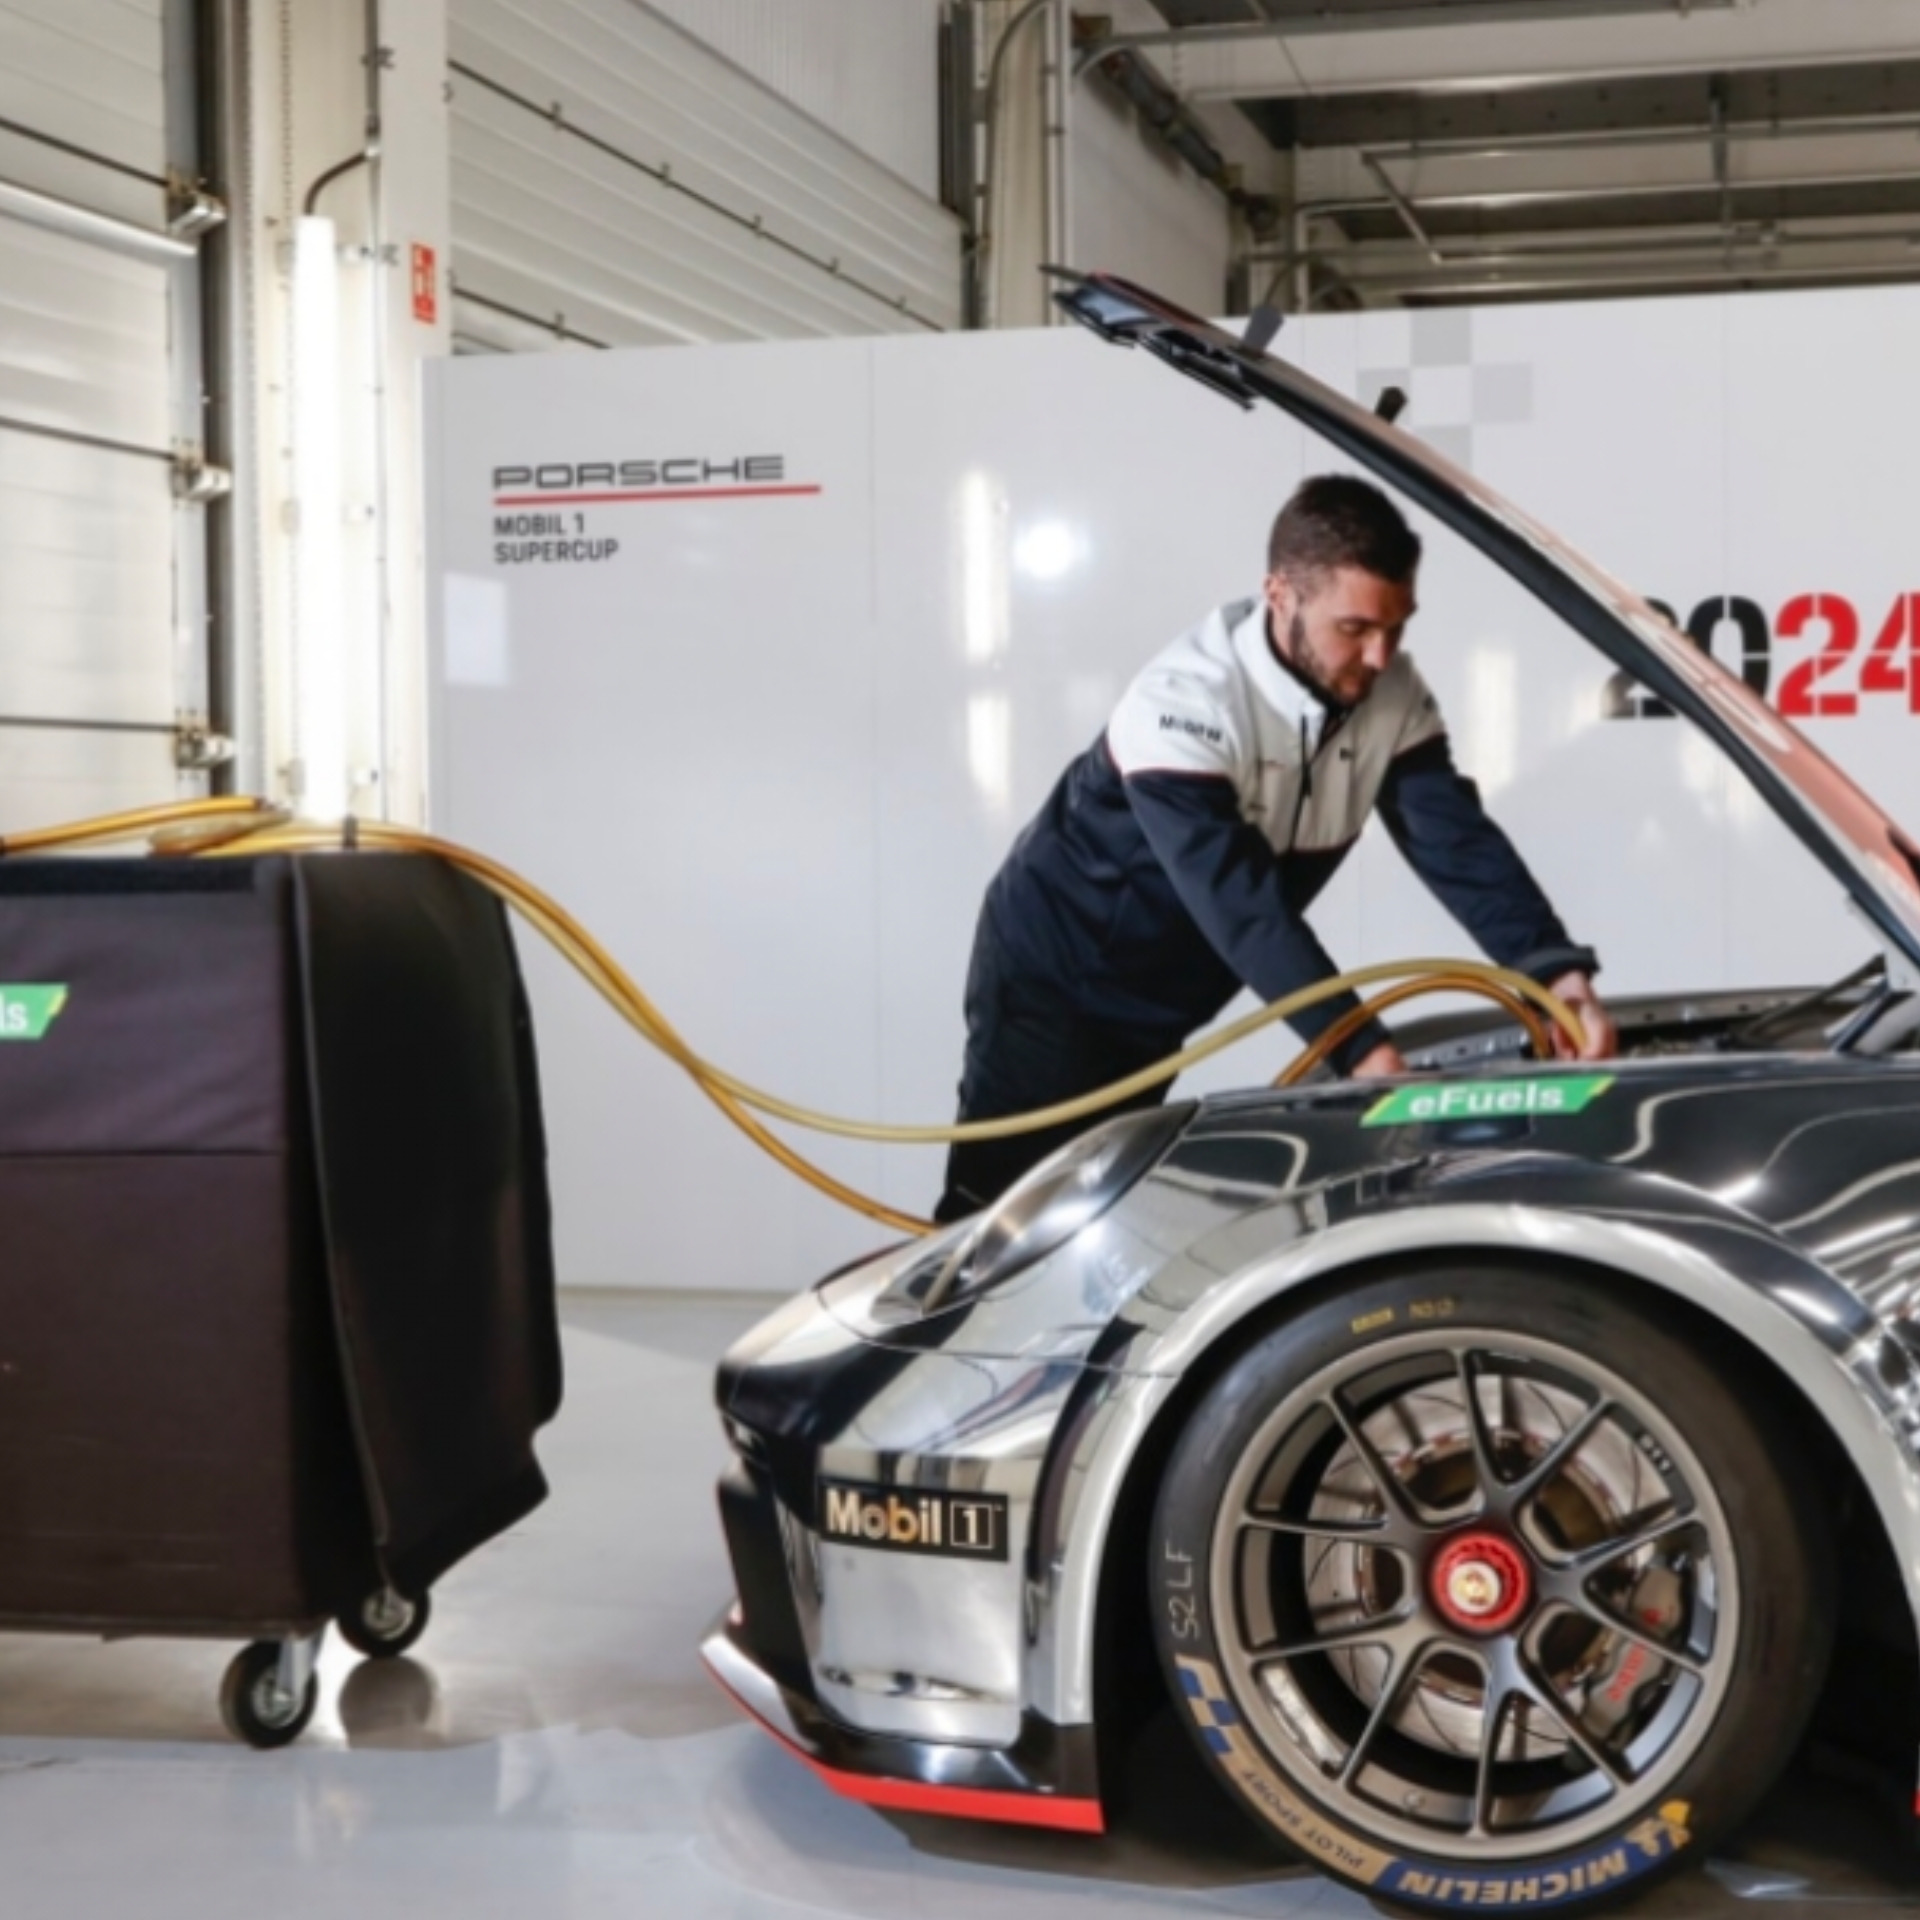 2024 Porsche invest in synthetic fuels